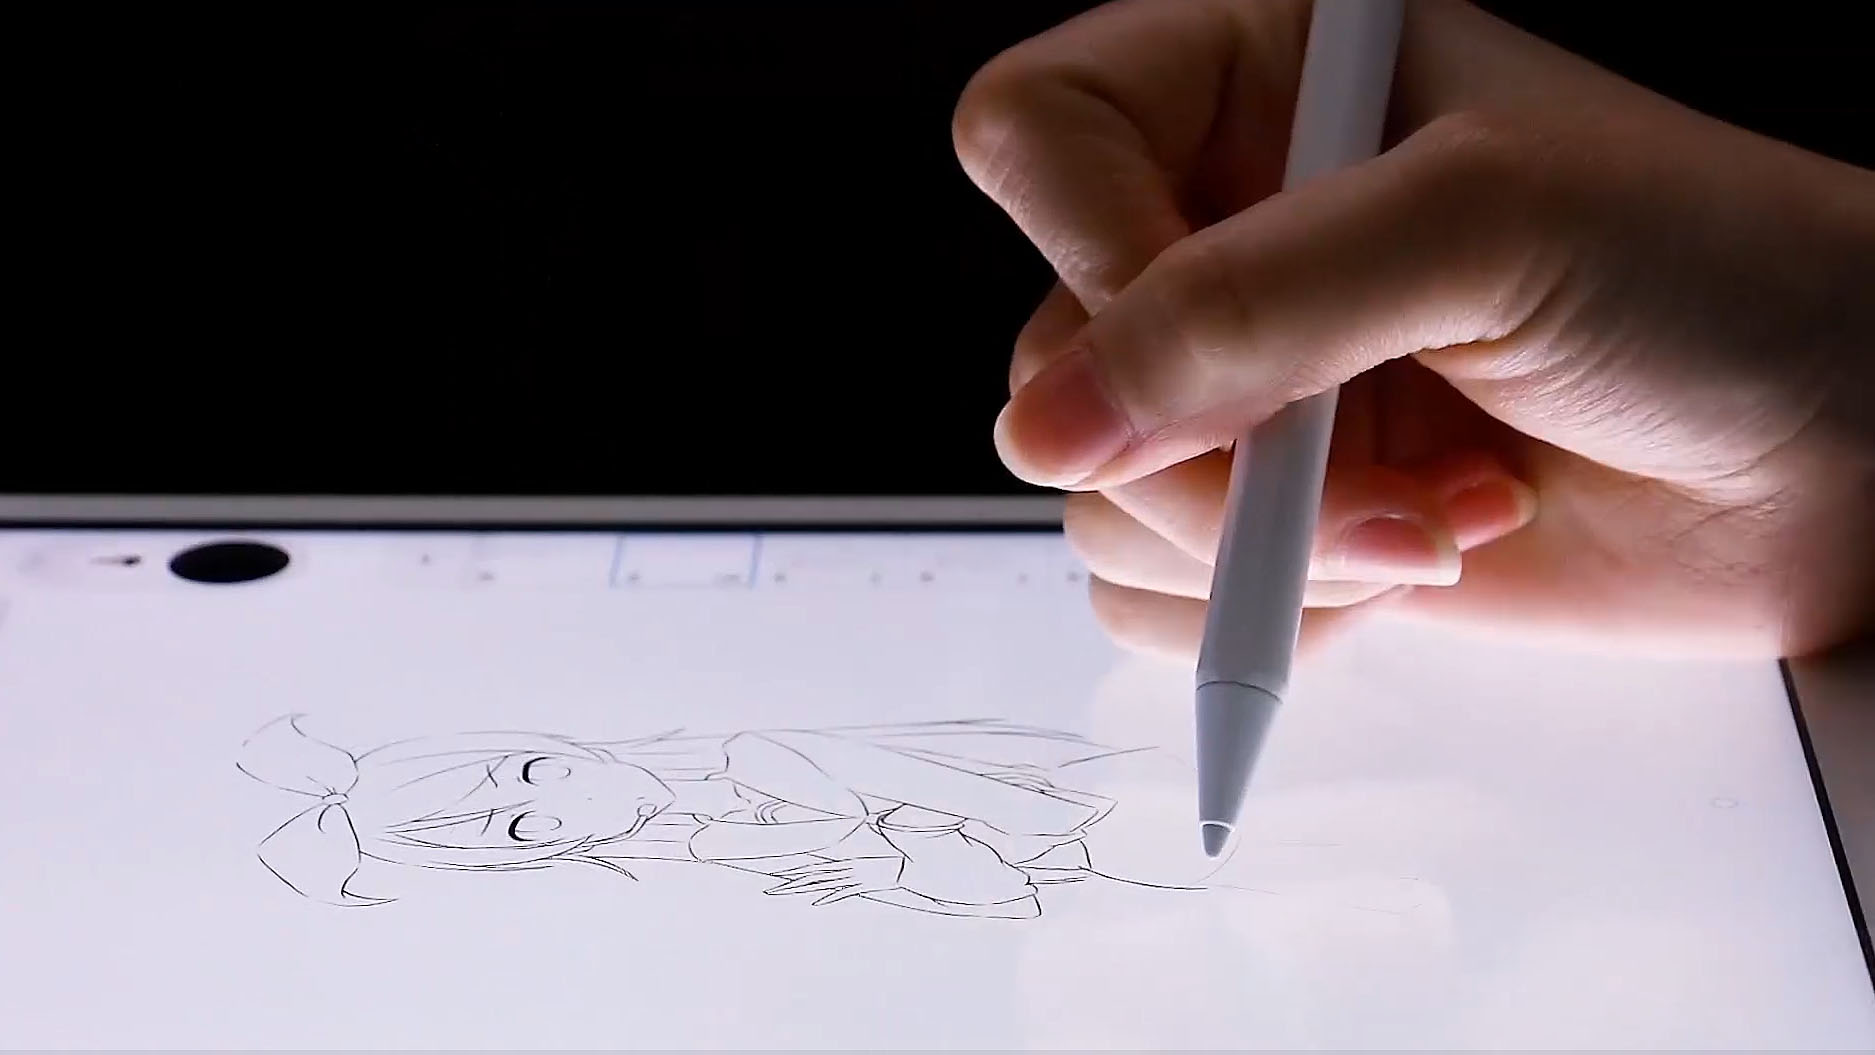 The JamJake K10 Stylus Pen for iPad being used to sketch a drawing on an iPad.